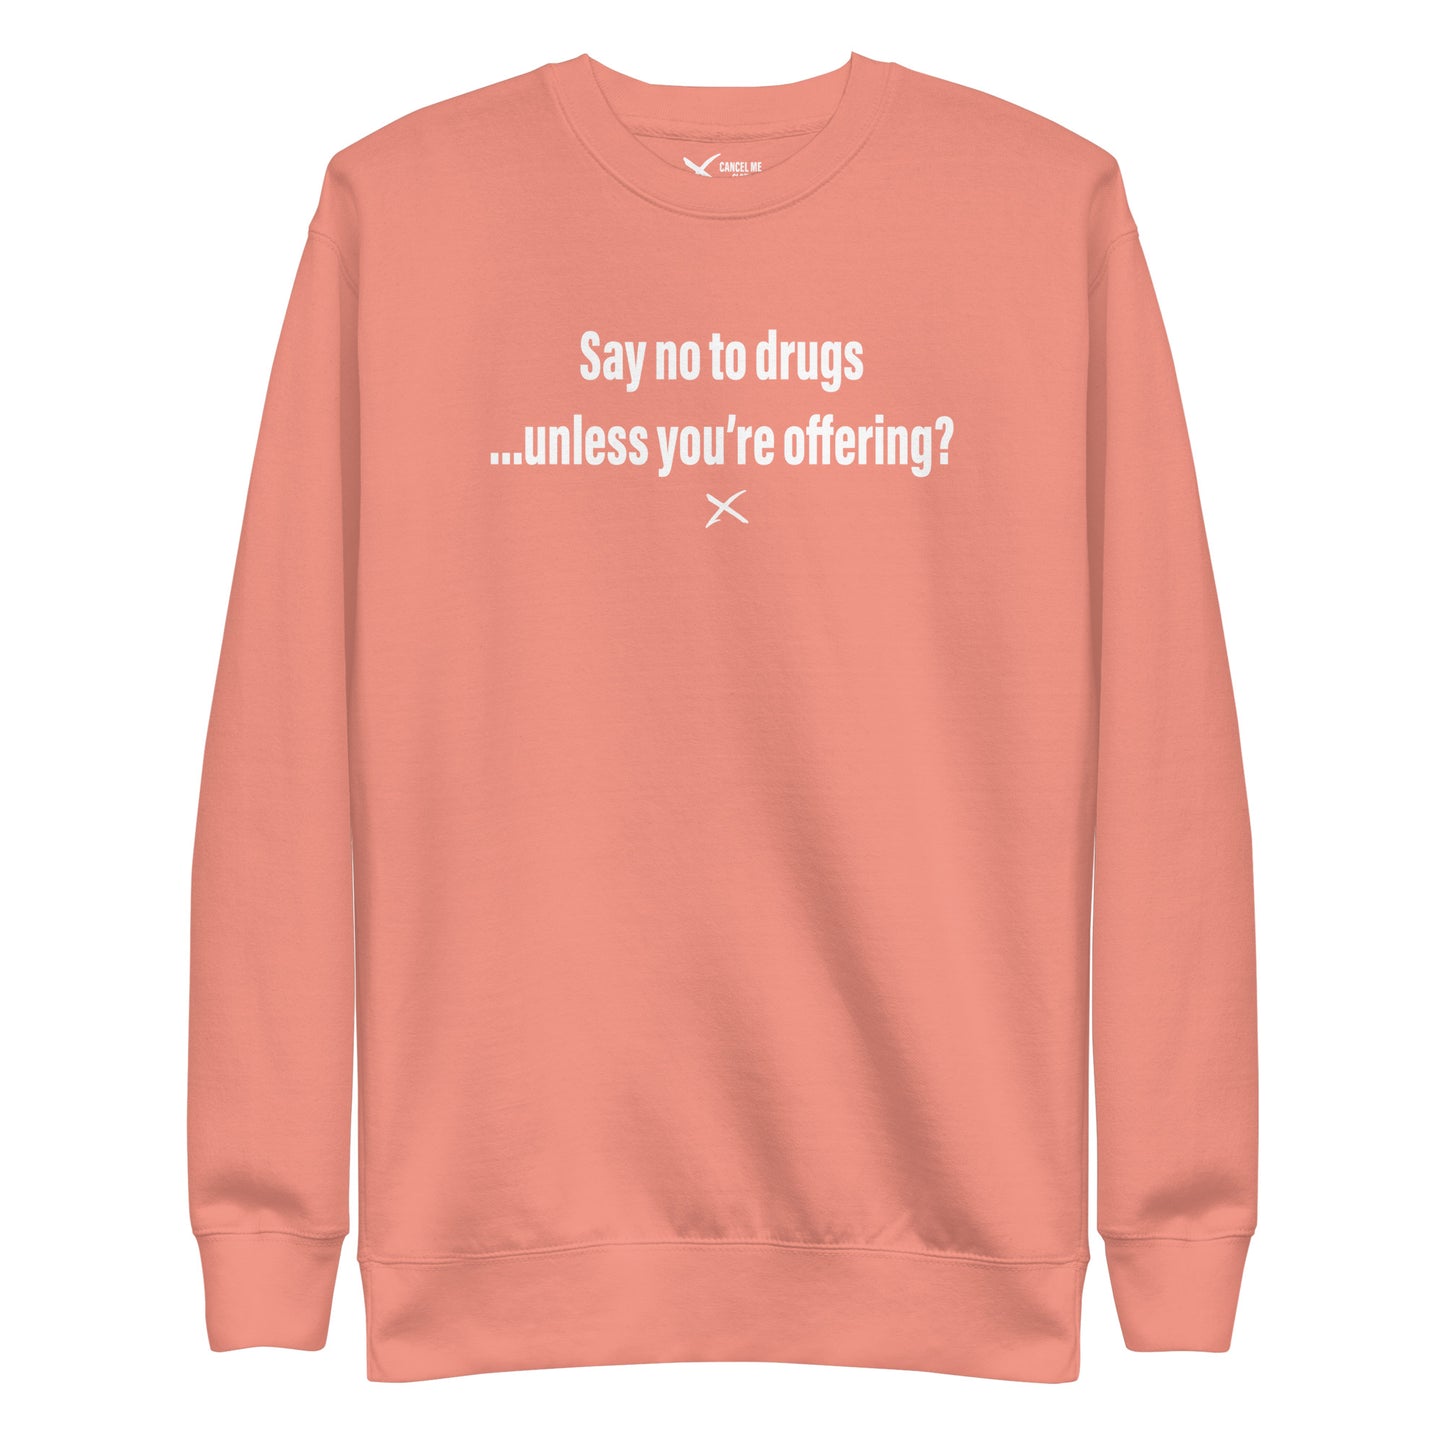 Say no to drugs ...unless you're offering? - Sweatshirt